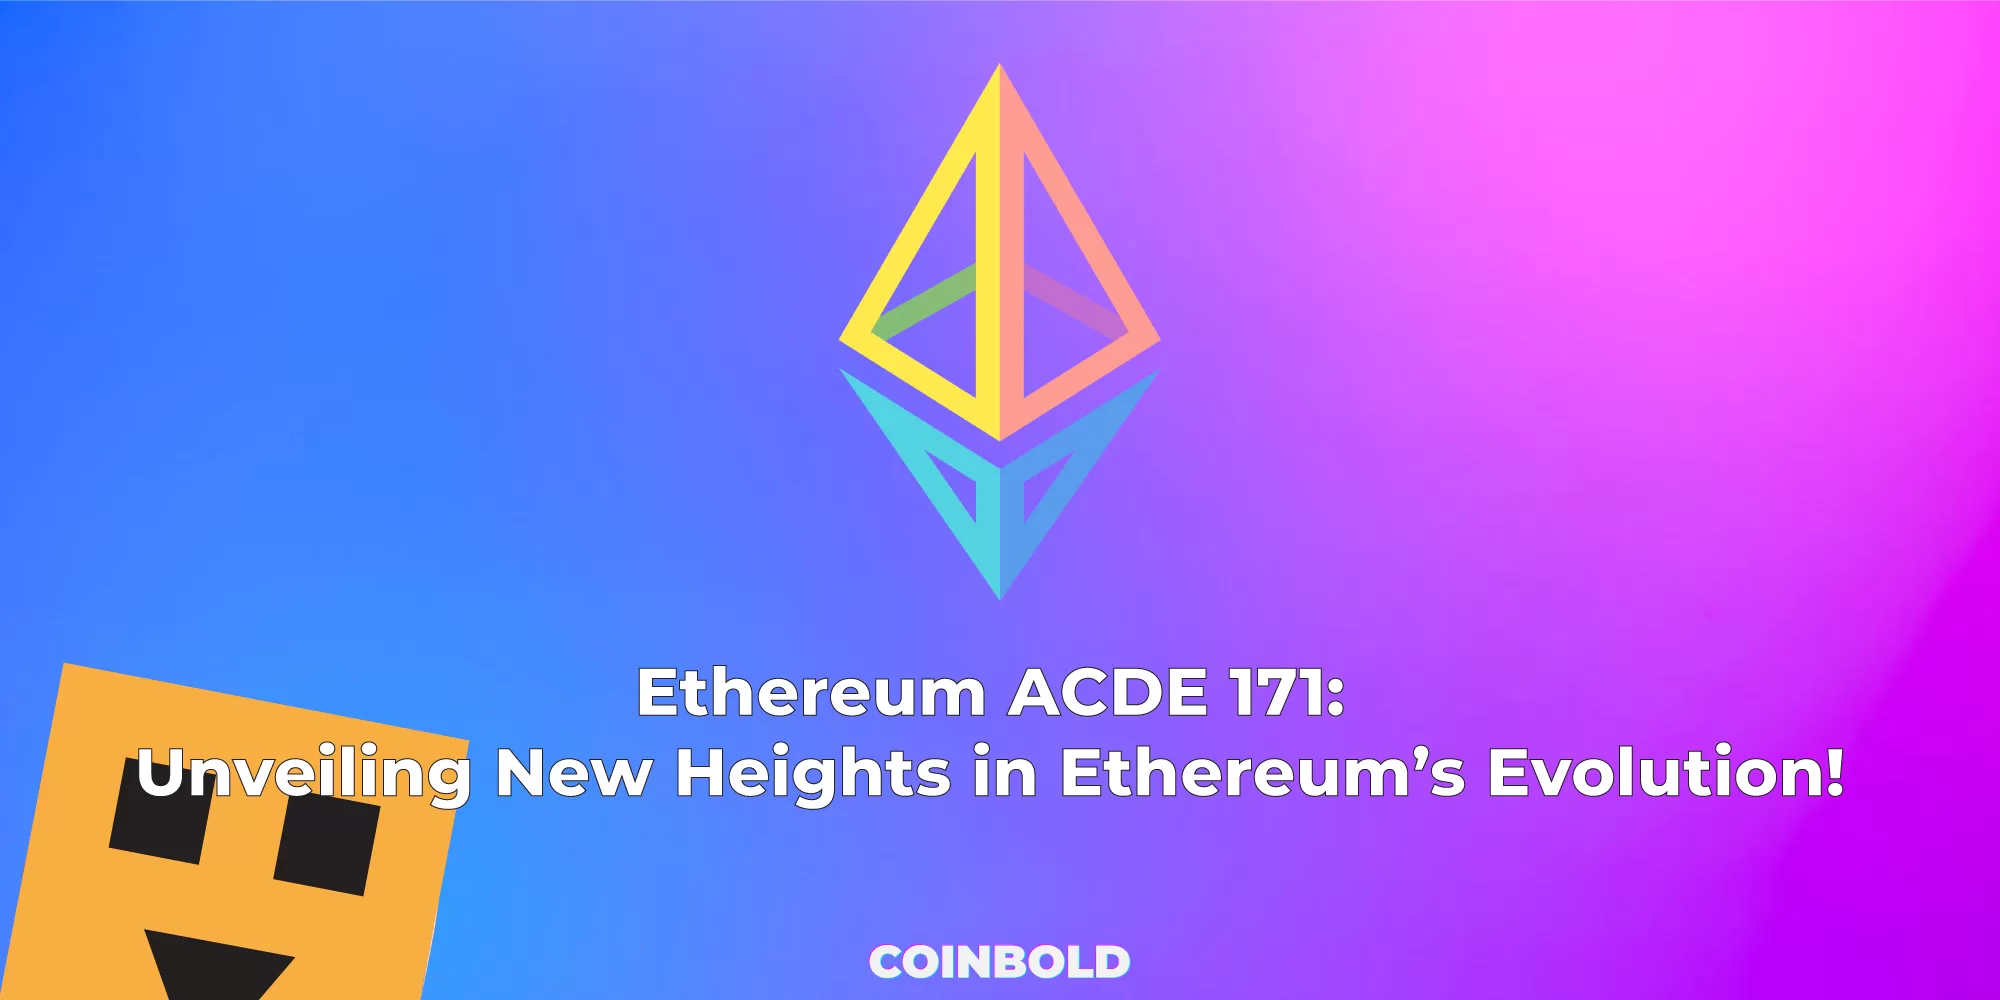 Ethereum ACDE 171 Unveiling New Heights in Ethereum’s Evolution